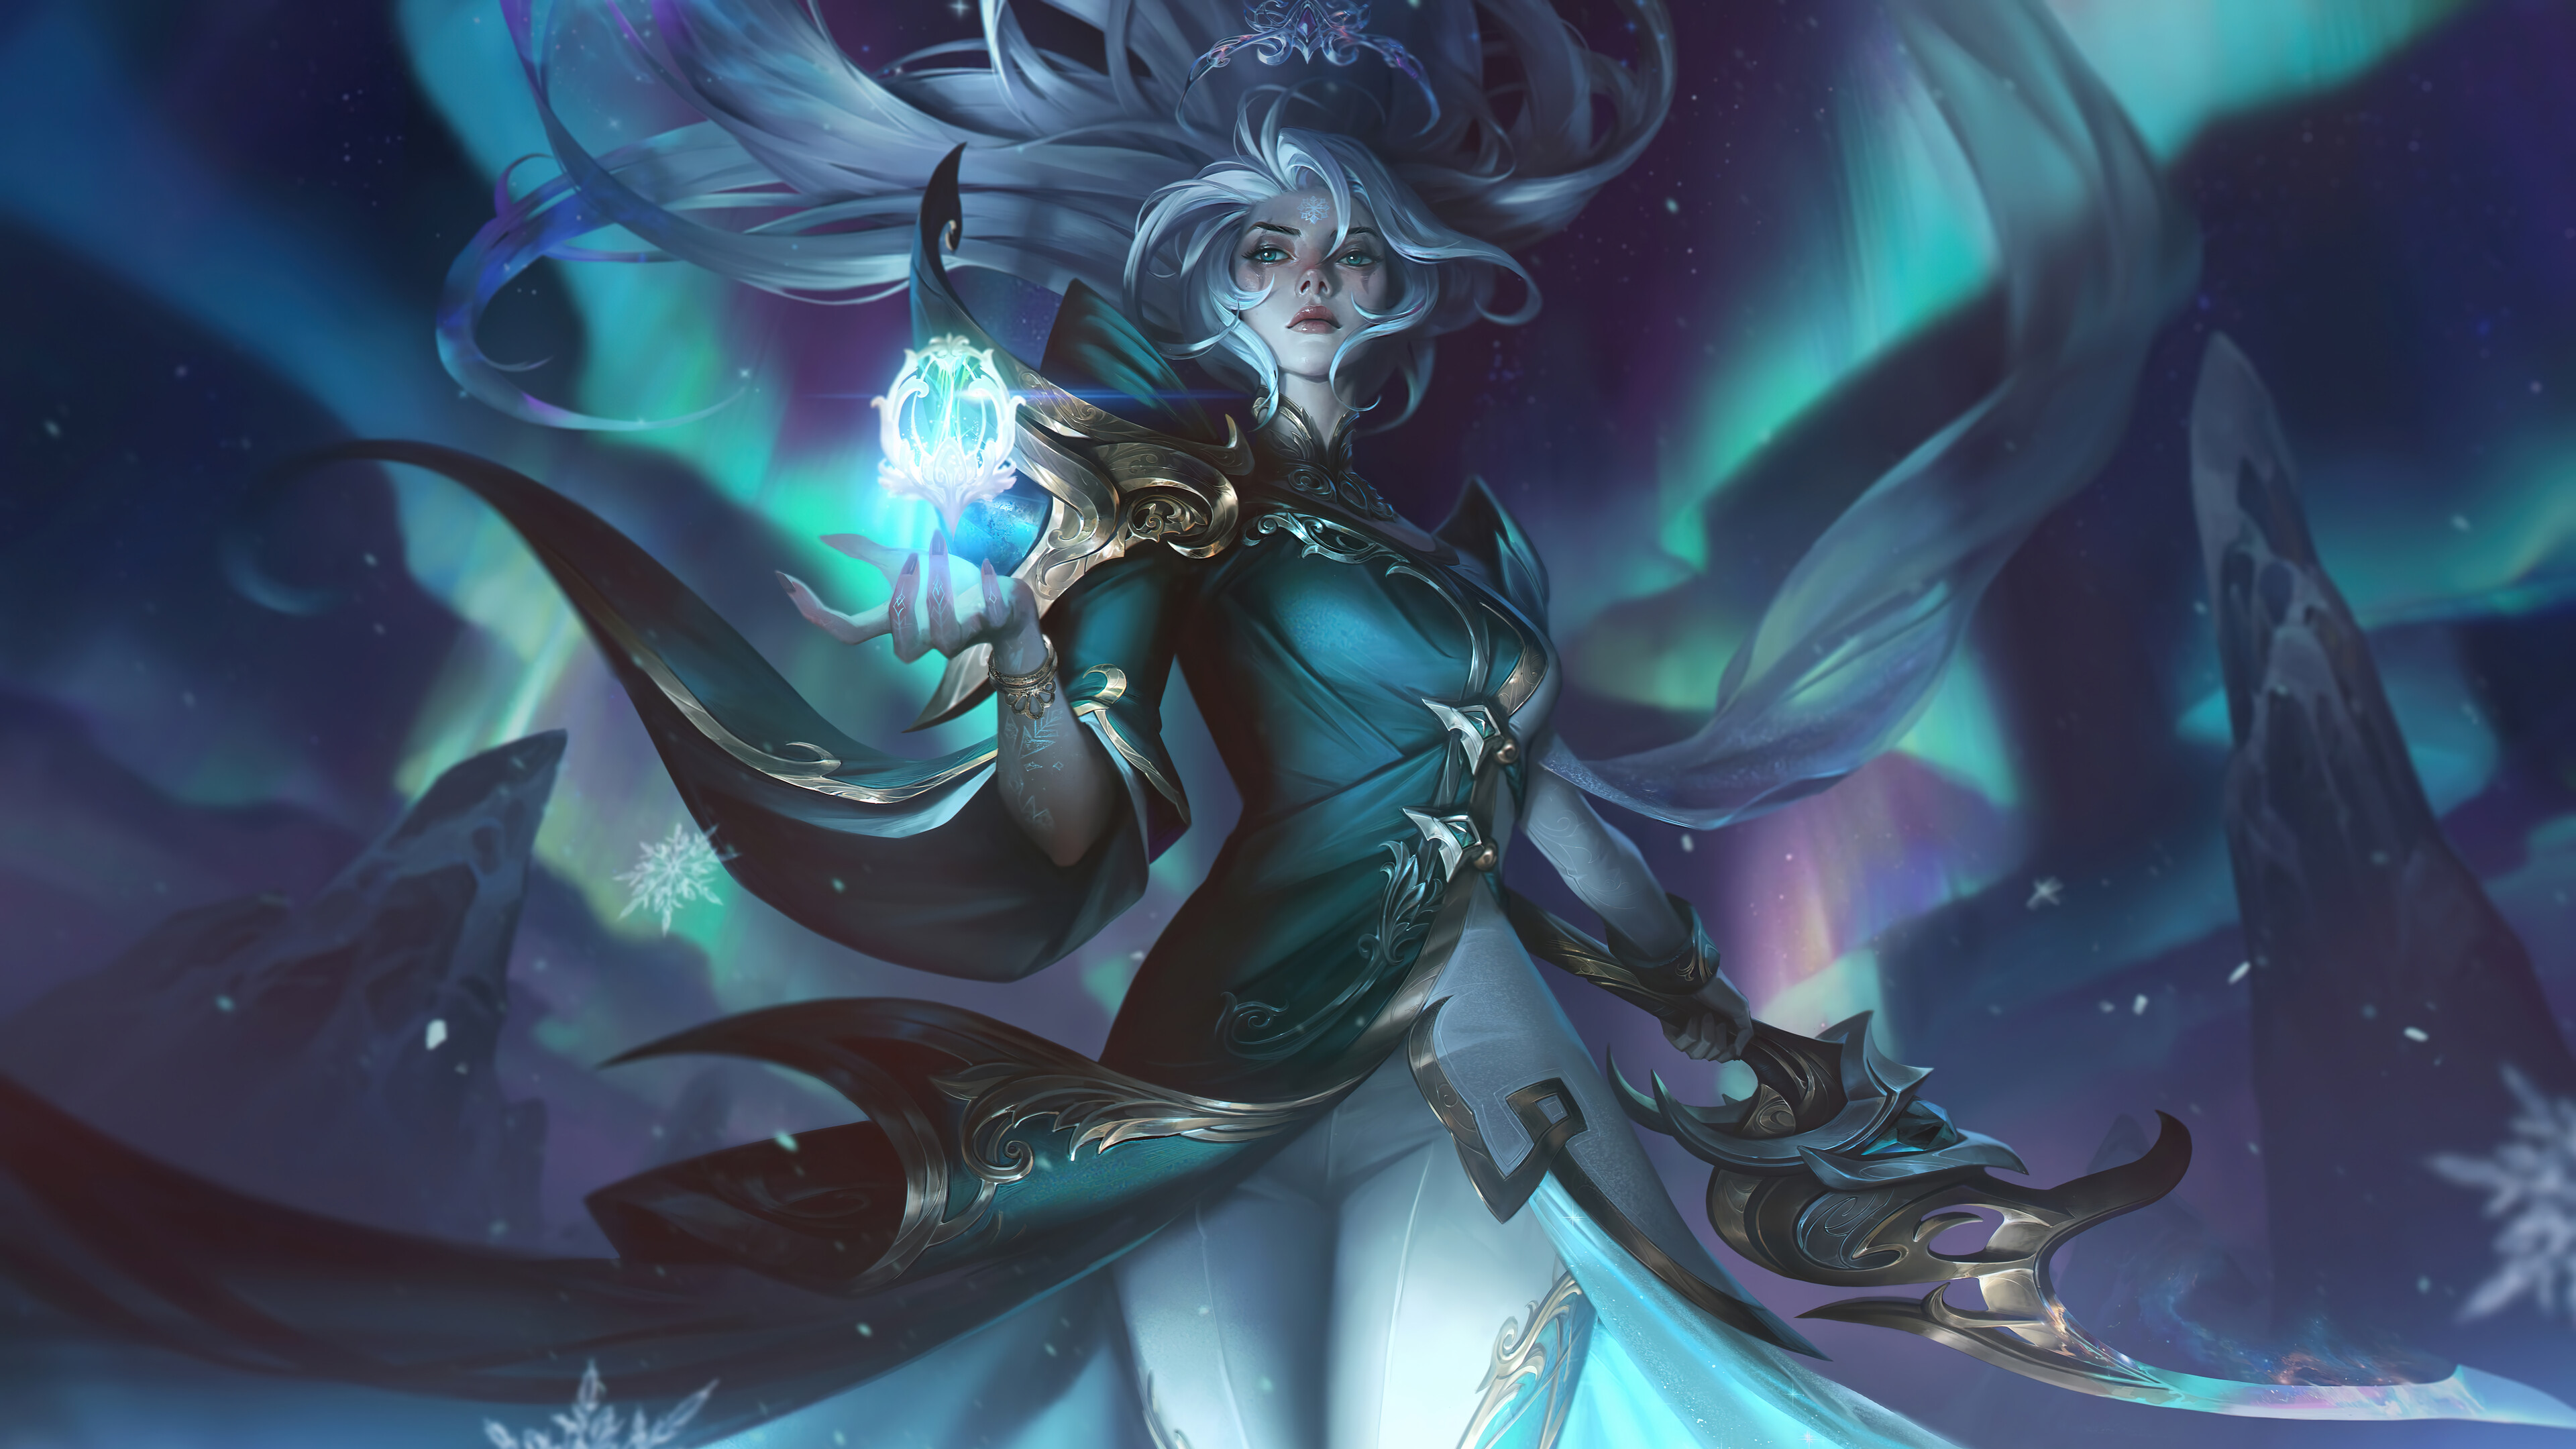 Winterblessed League Of Legends Diana League Of Legends League Of Legends Digital Art Riot Games GZG 3840x2160